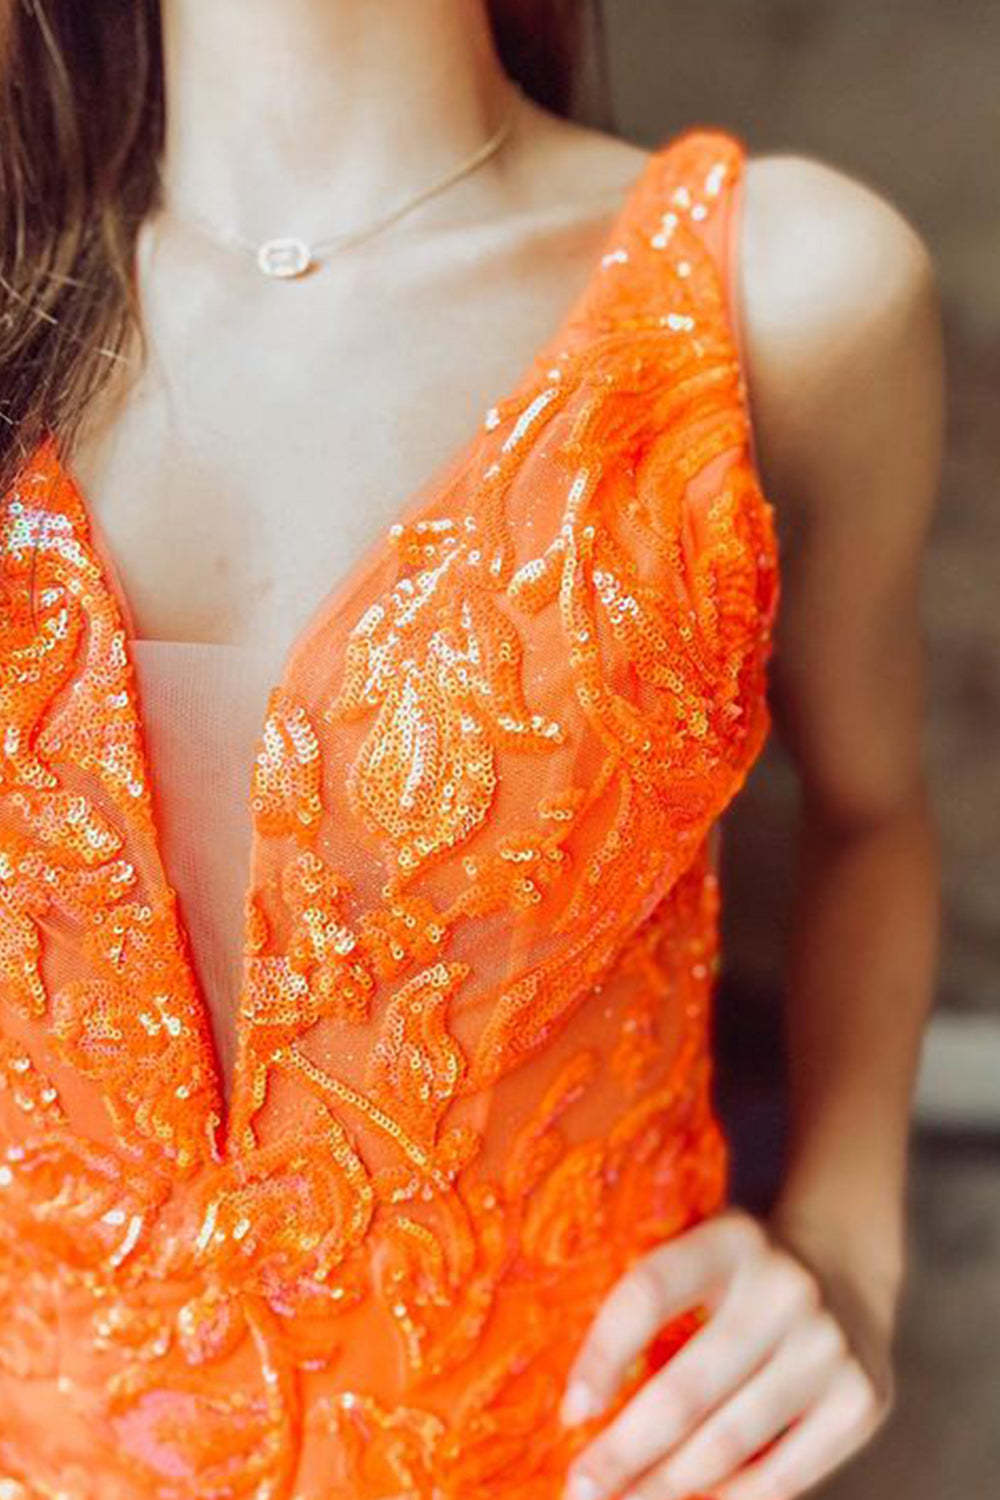 Sparkly Sheath Deep V Neck Orange Sequins Short Homecoming Dress with Feather